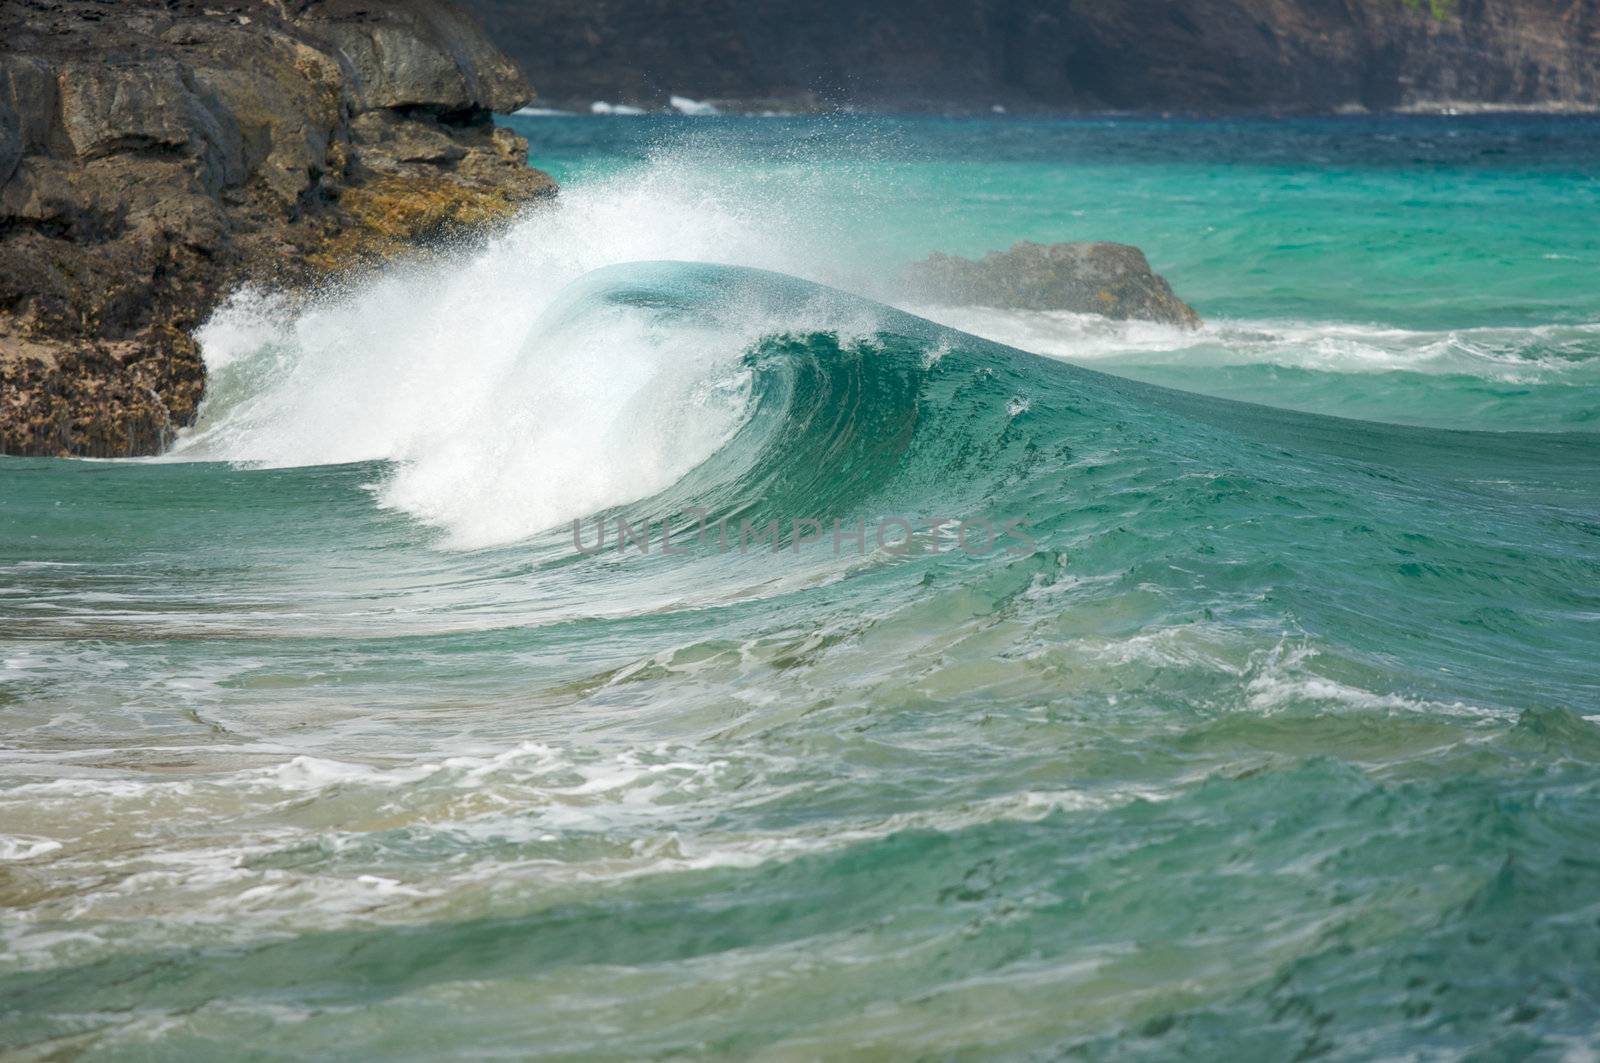 Crashing Wave on the Napali Coast by Feverpitched